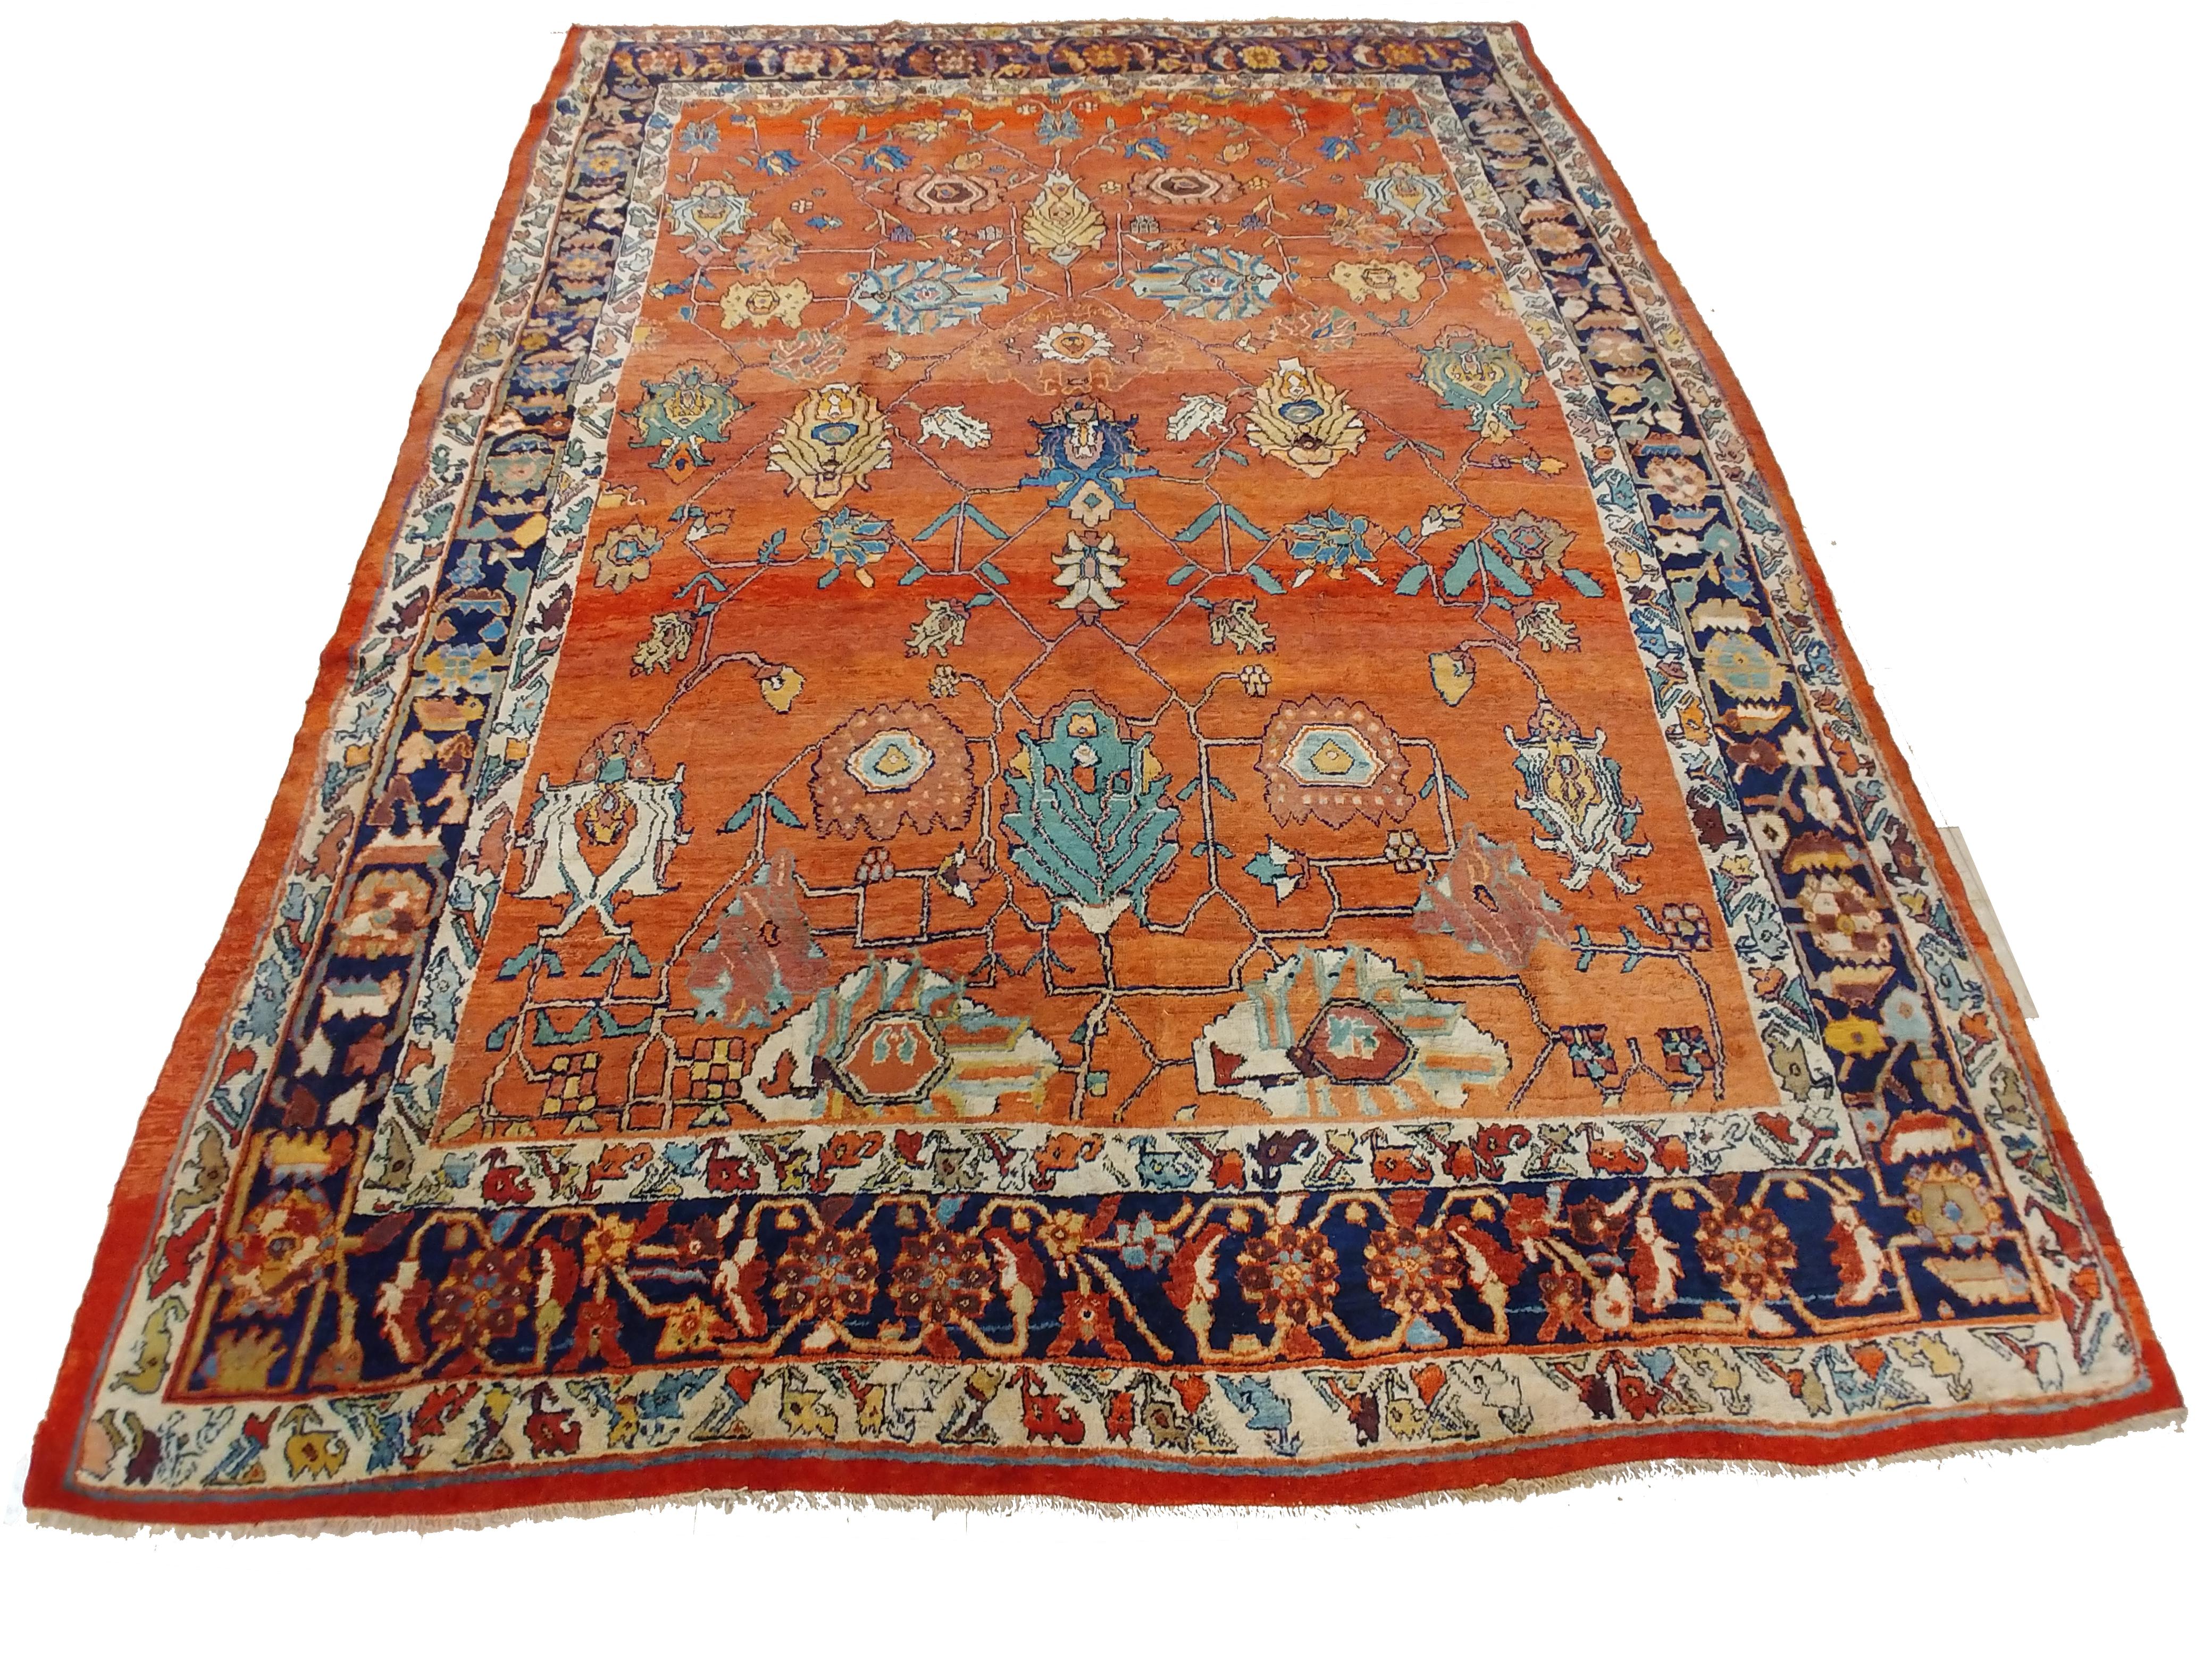 Unique piece, crossover between a Bijar and Sultanabad. Great allover design: Bijar rugs are often called the iron rugs of Persia. The Bijar is a heavy durable rug that has been very popular in the United States. Most Bijar carpets are woven by